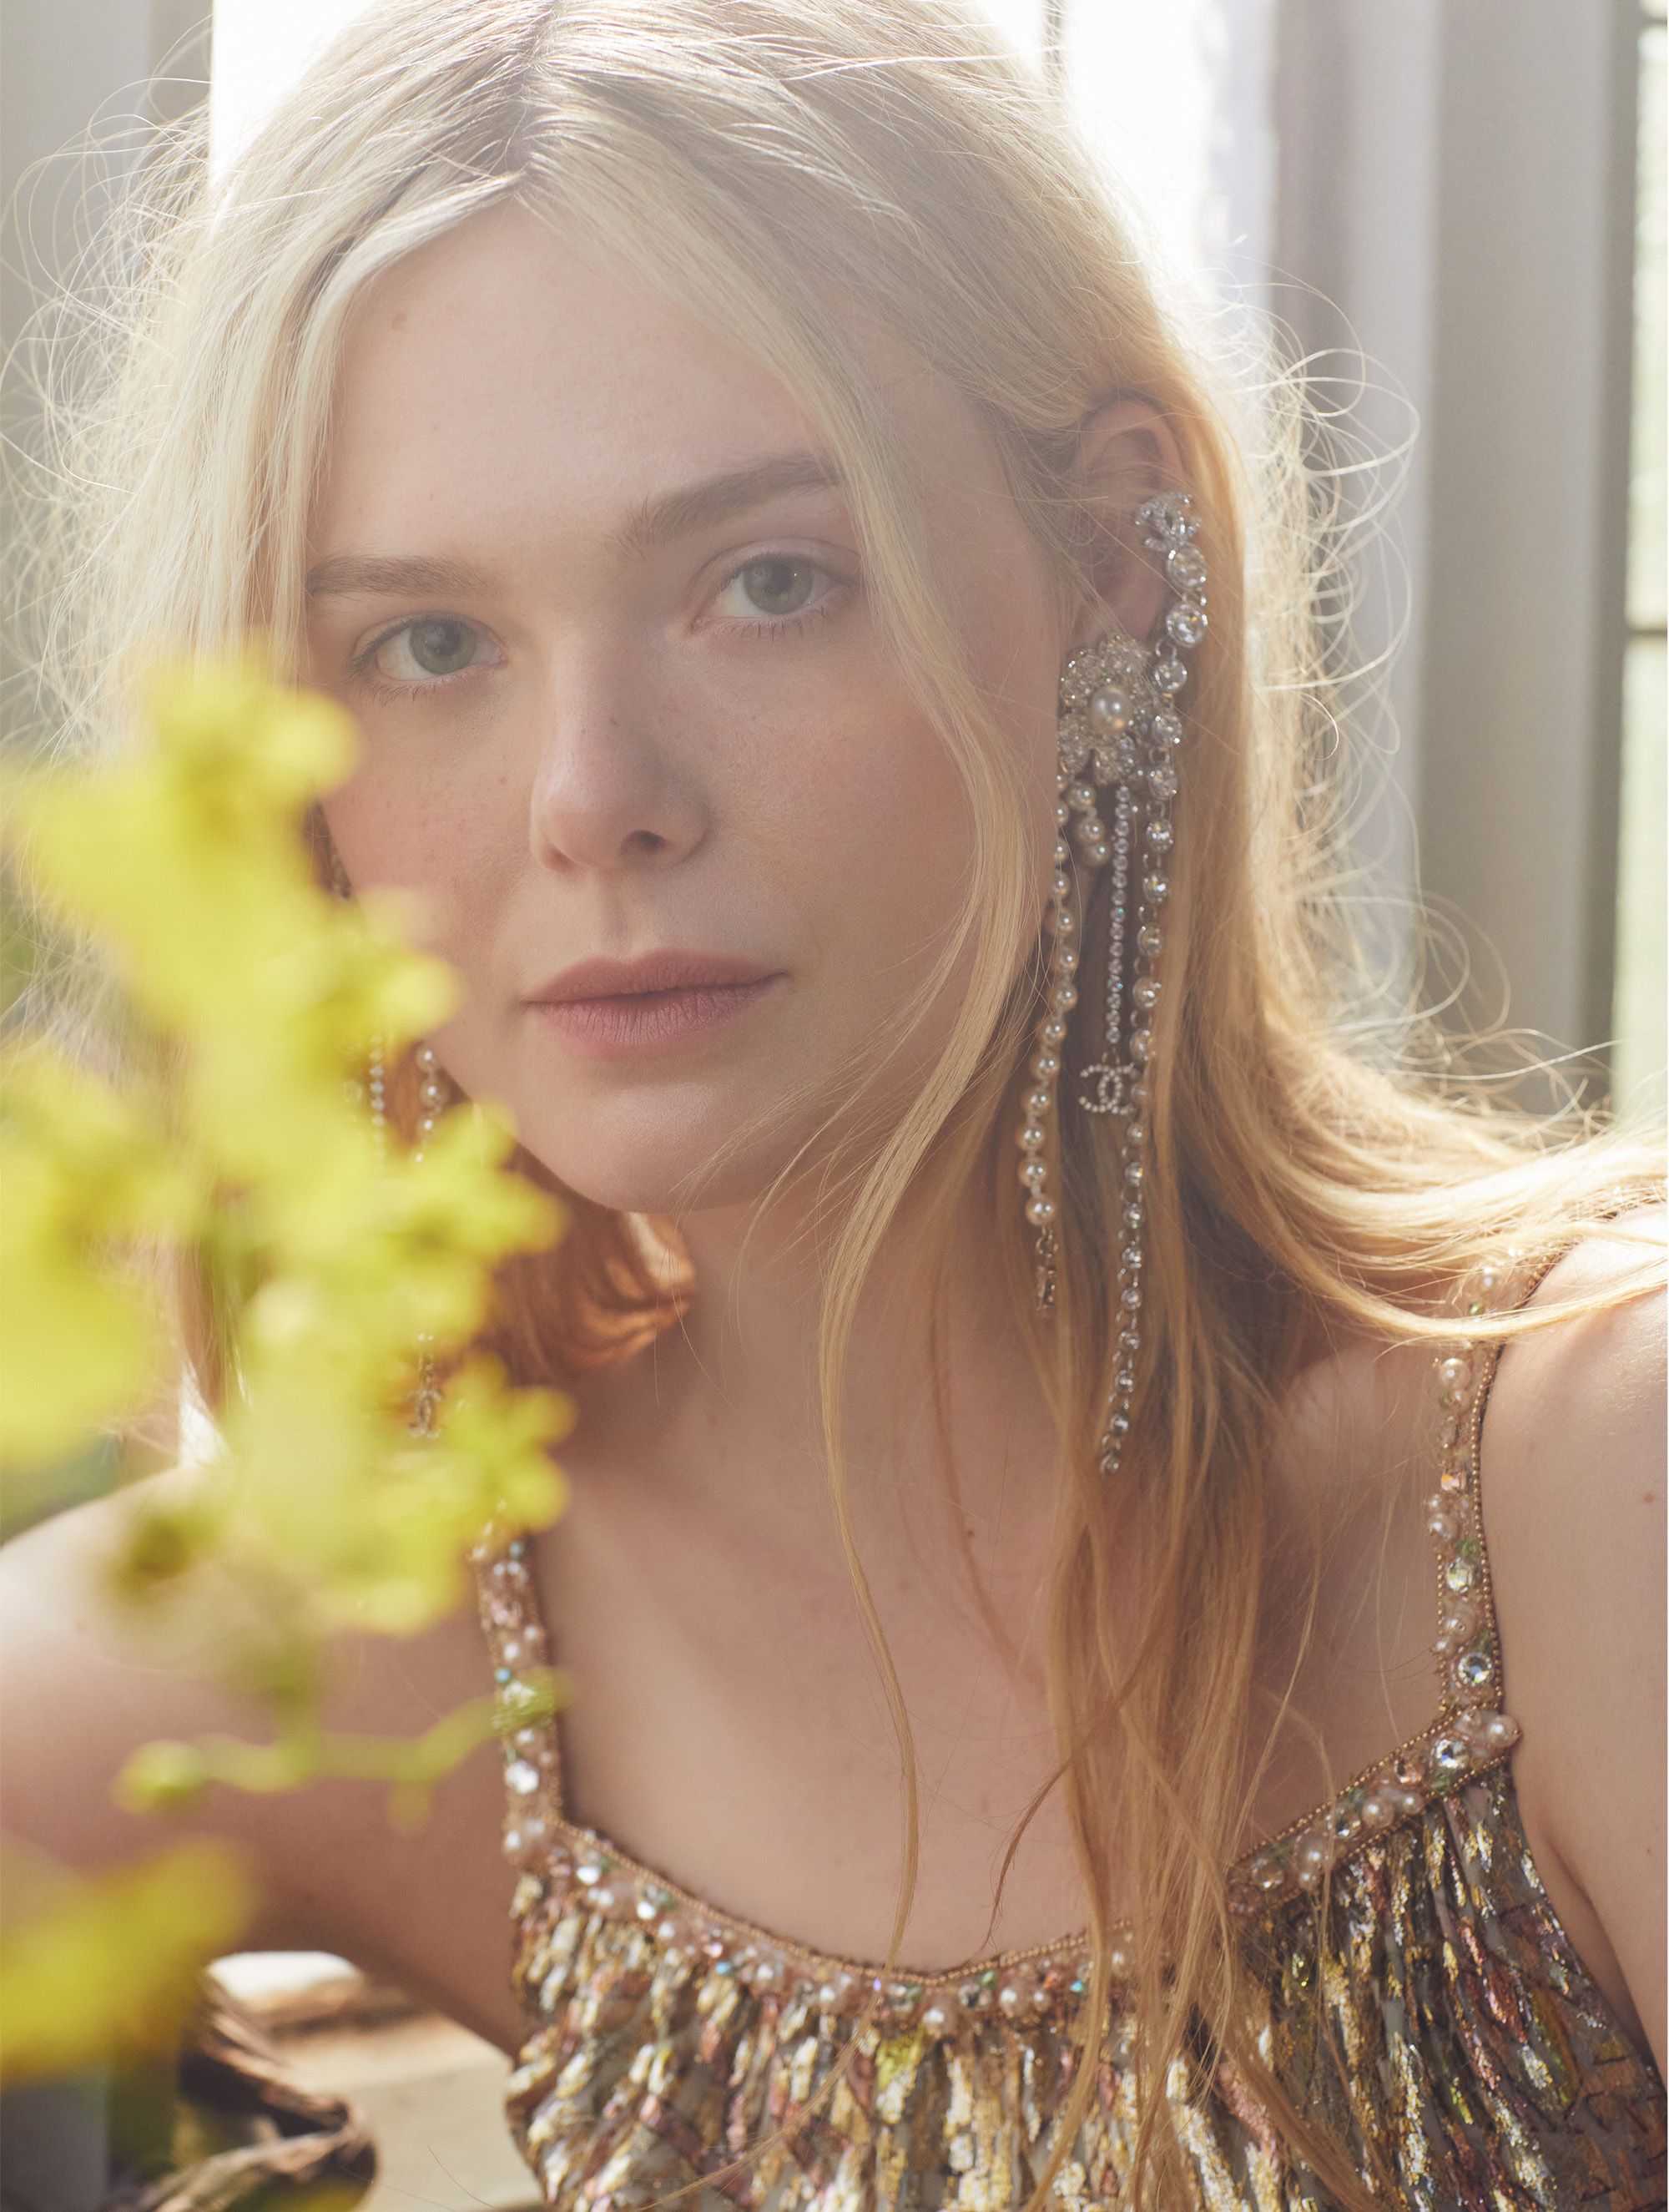 Elle Fanning Has a Fairytale Fashion Moment at Toronto